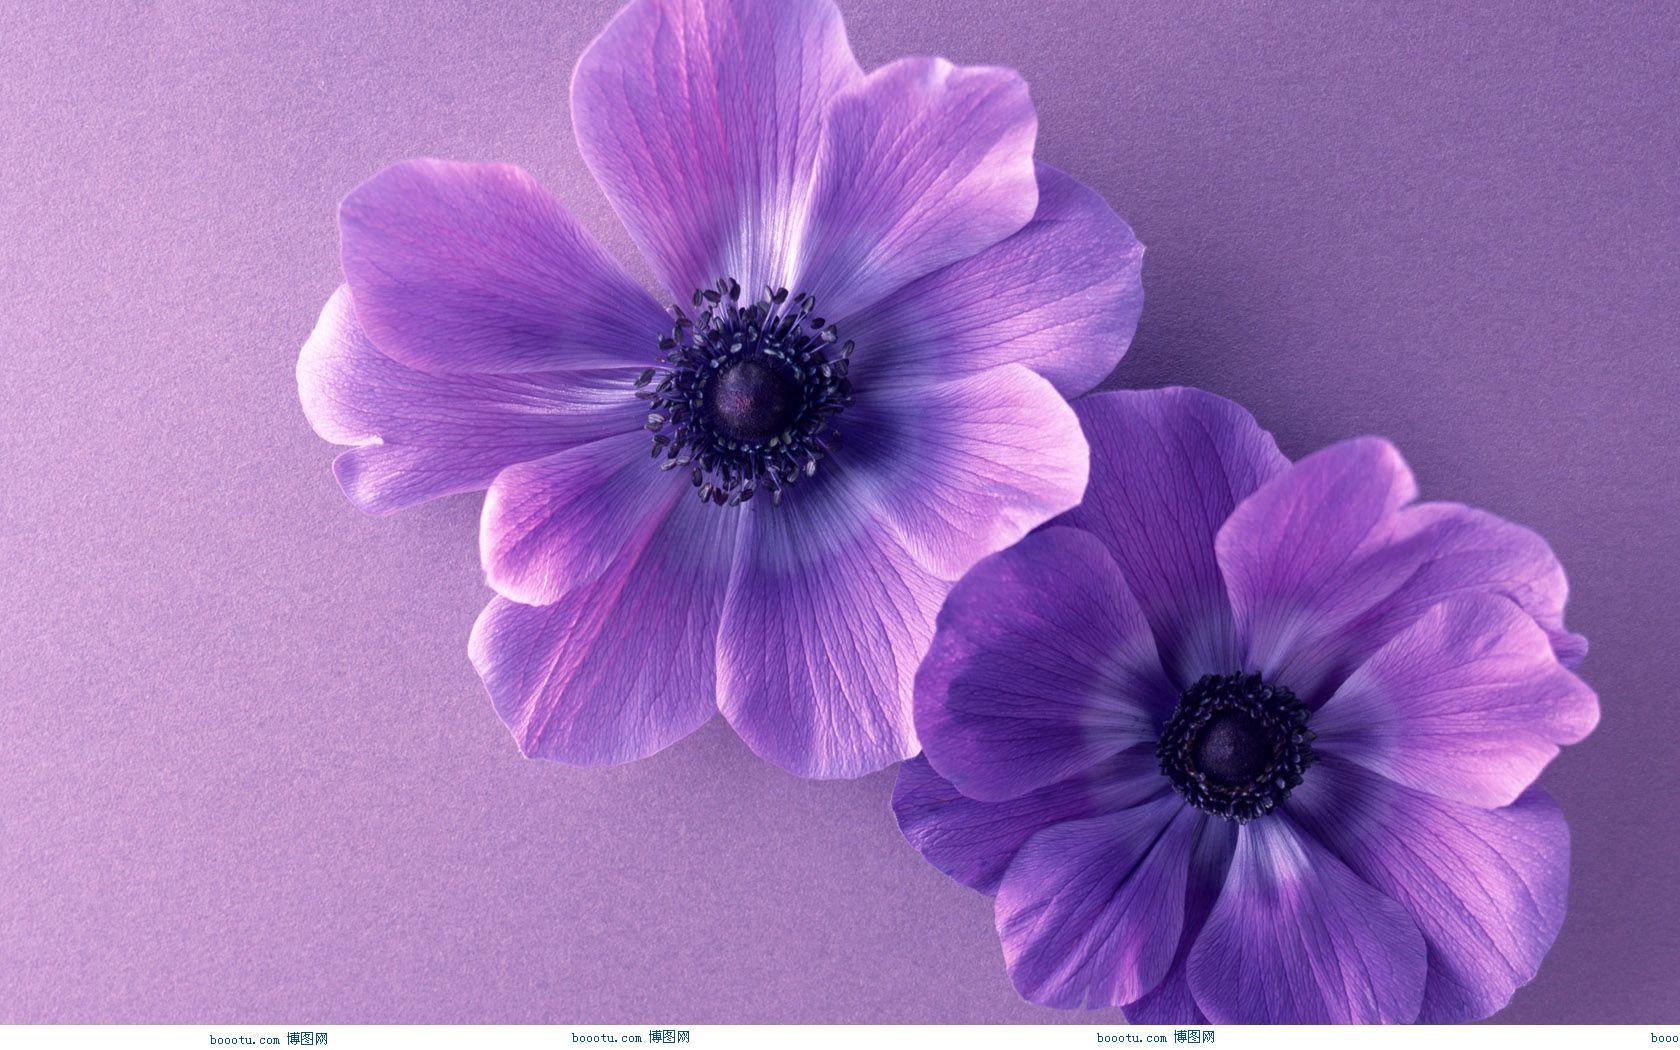 Cute Purple Wallpaper Free Wallpaper That You Can Download To